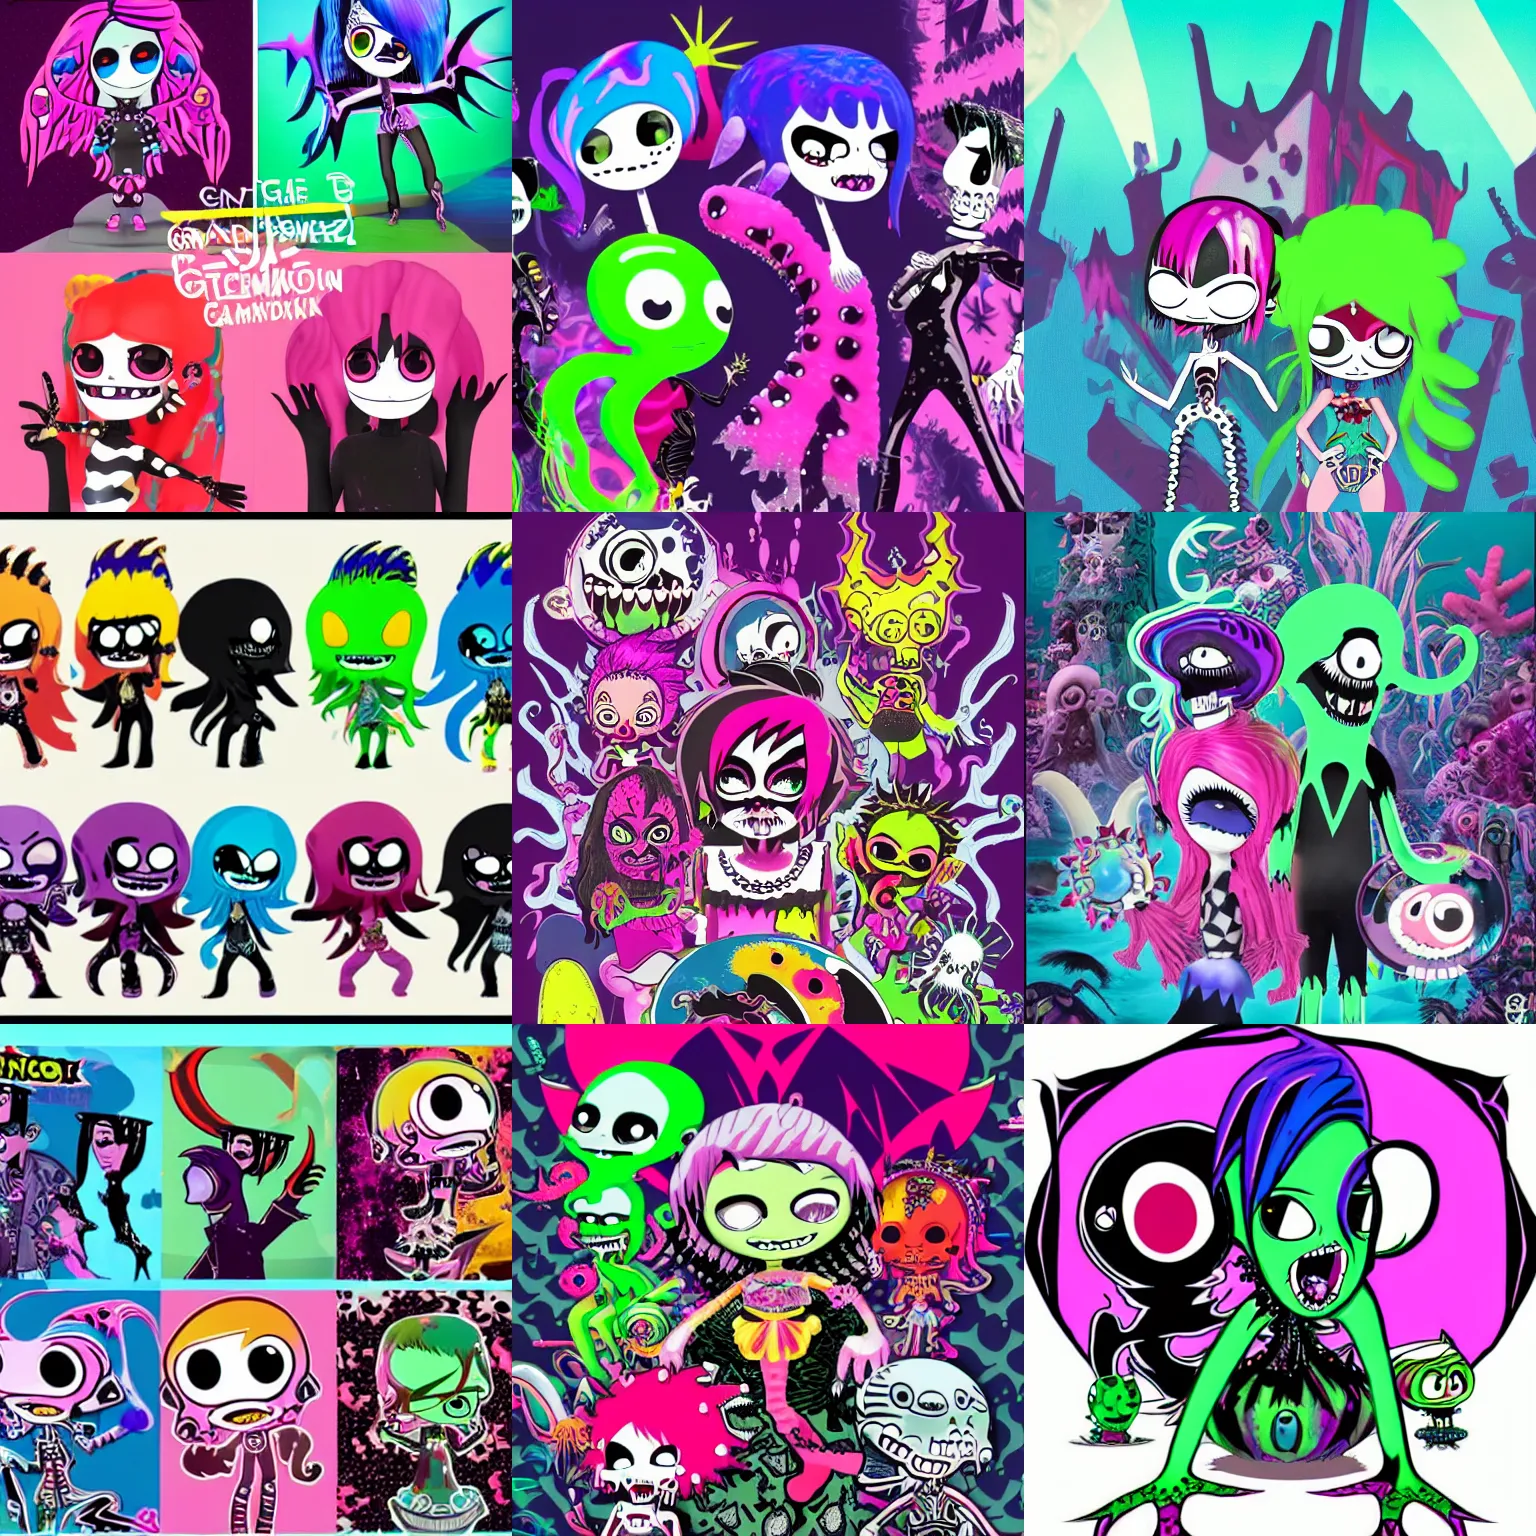 Prompt: CGI lisa frank gothic punk vampiric underwater vampiric squid character designs of various shapes and sizes by genndy tartakovsky and ruby gloom and the creators of fret nice being overseen by Jamie Hewlett from gorillaz for a splatoon game by nintendo